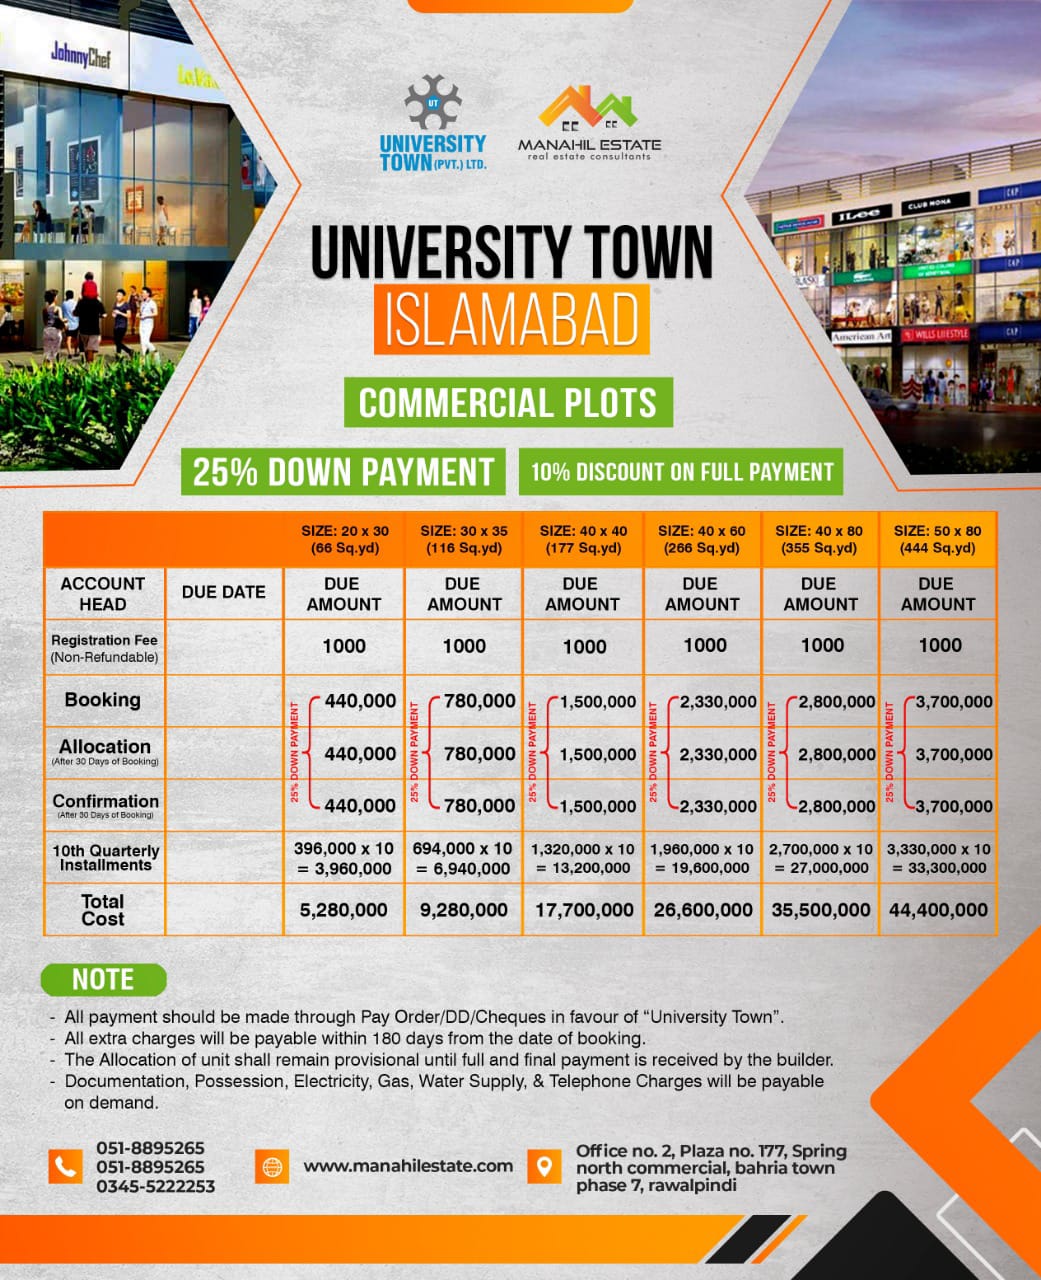 Unversity town commercial plots payment and installment plan